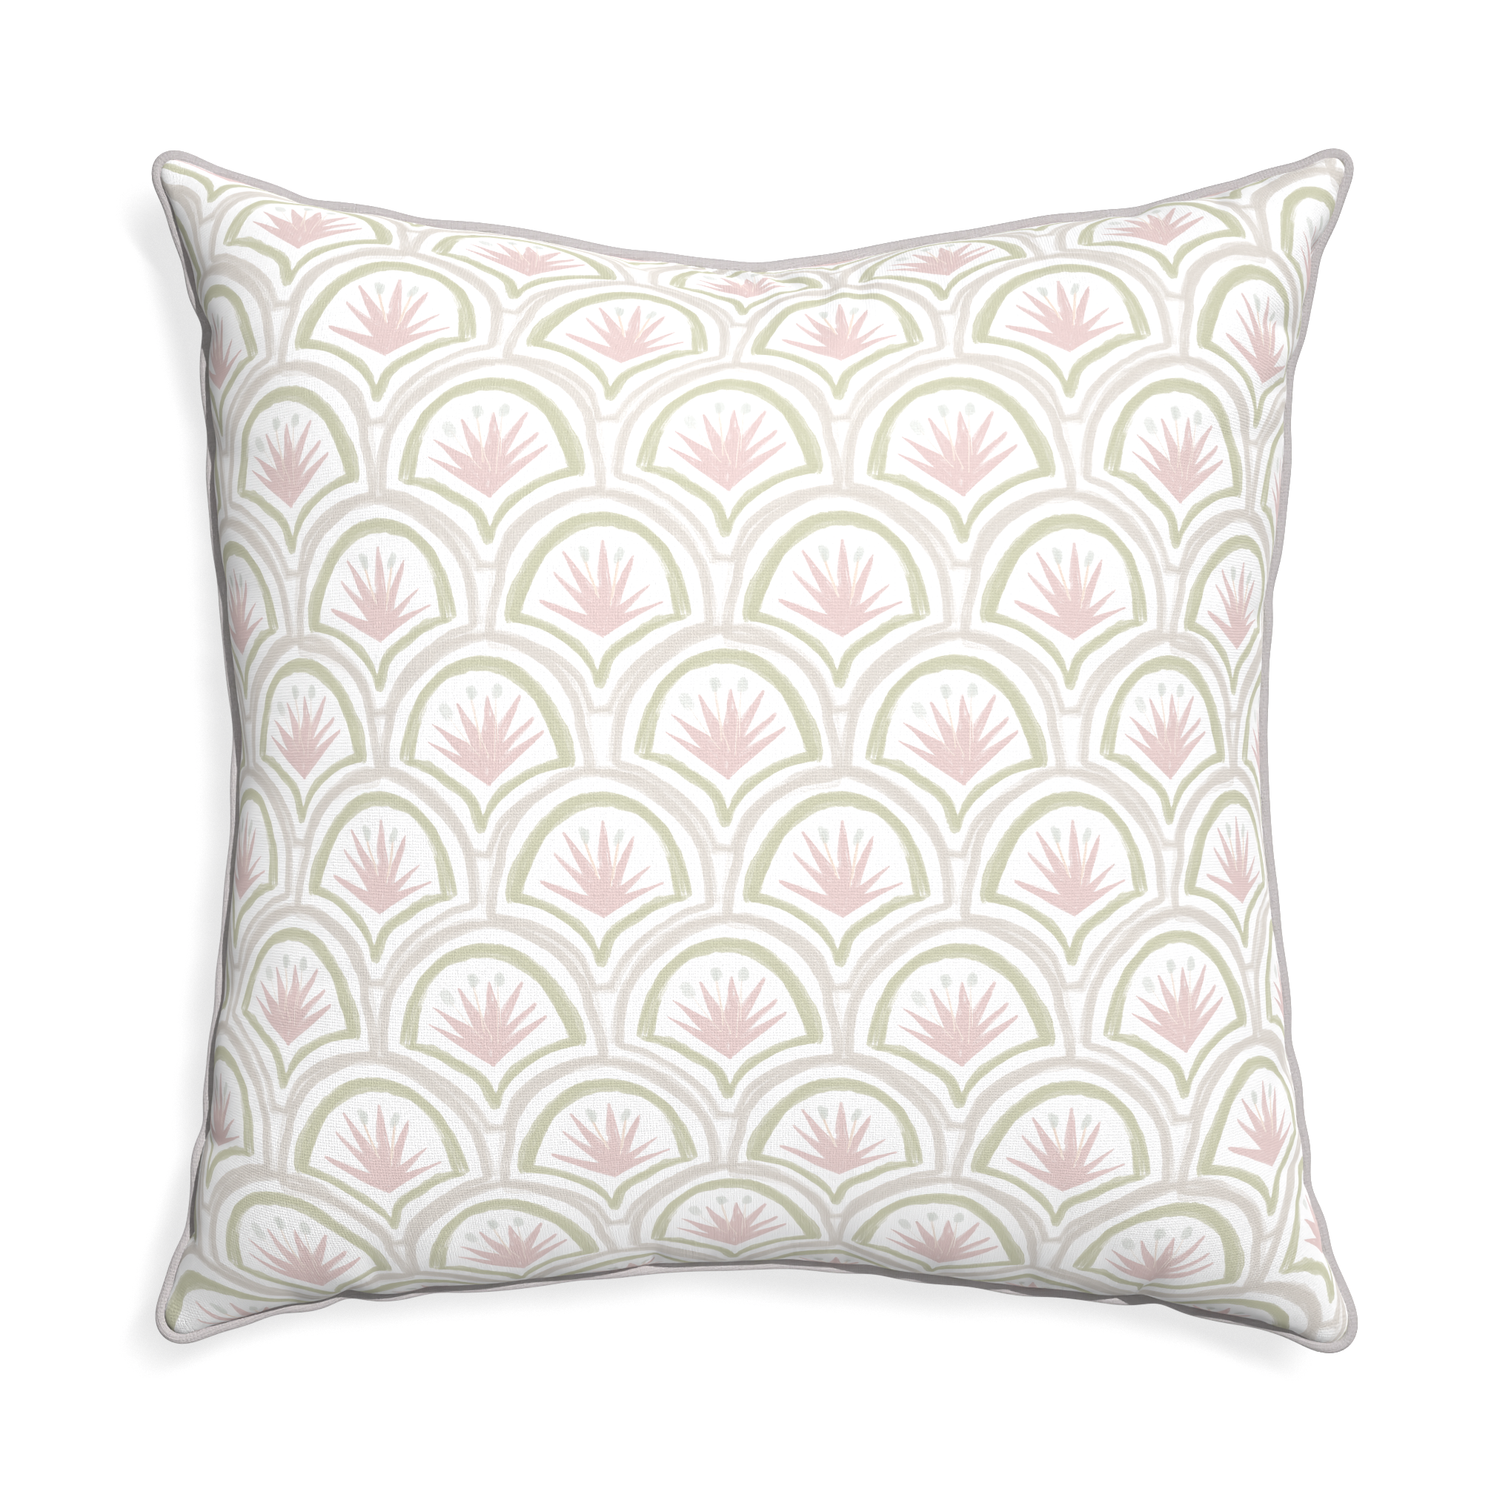 Euro-sham thatcher rose custom pink & green palmpillow with pebble piping on white background